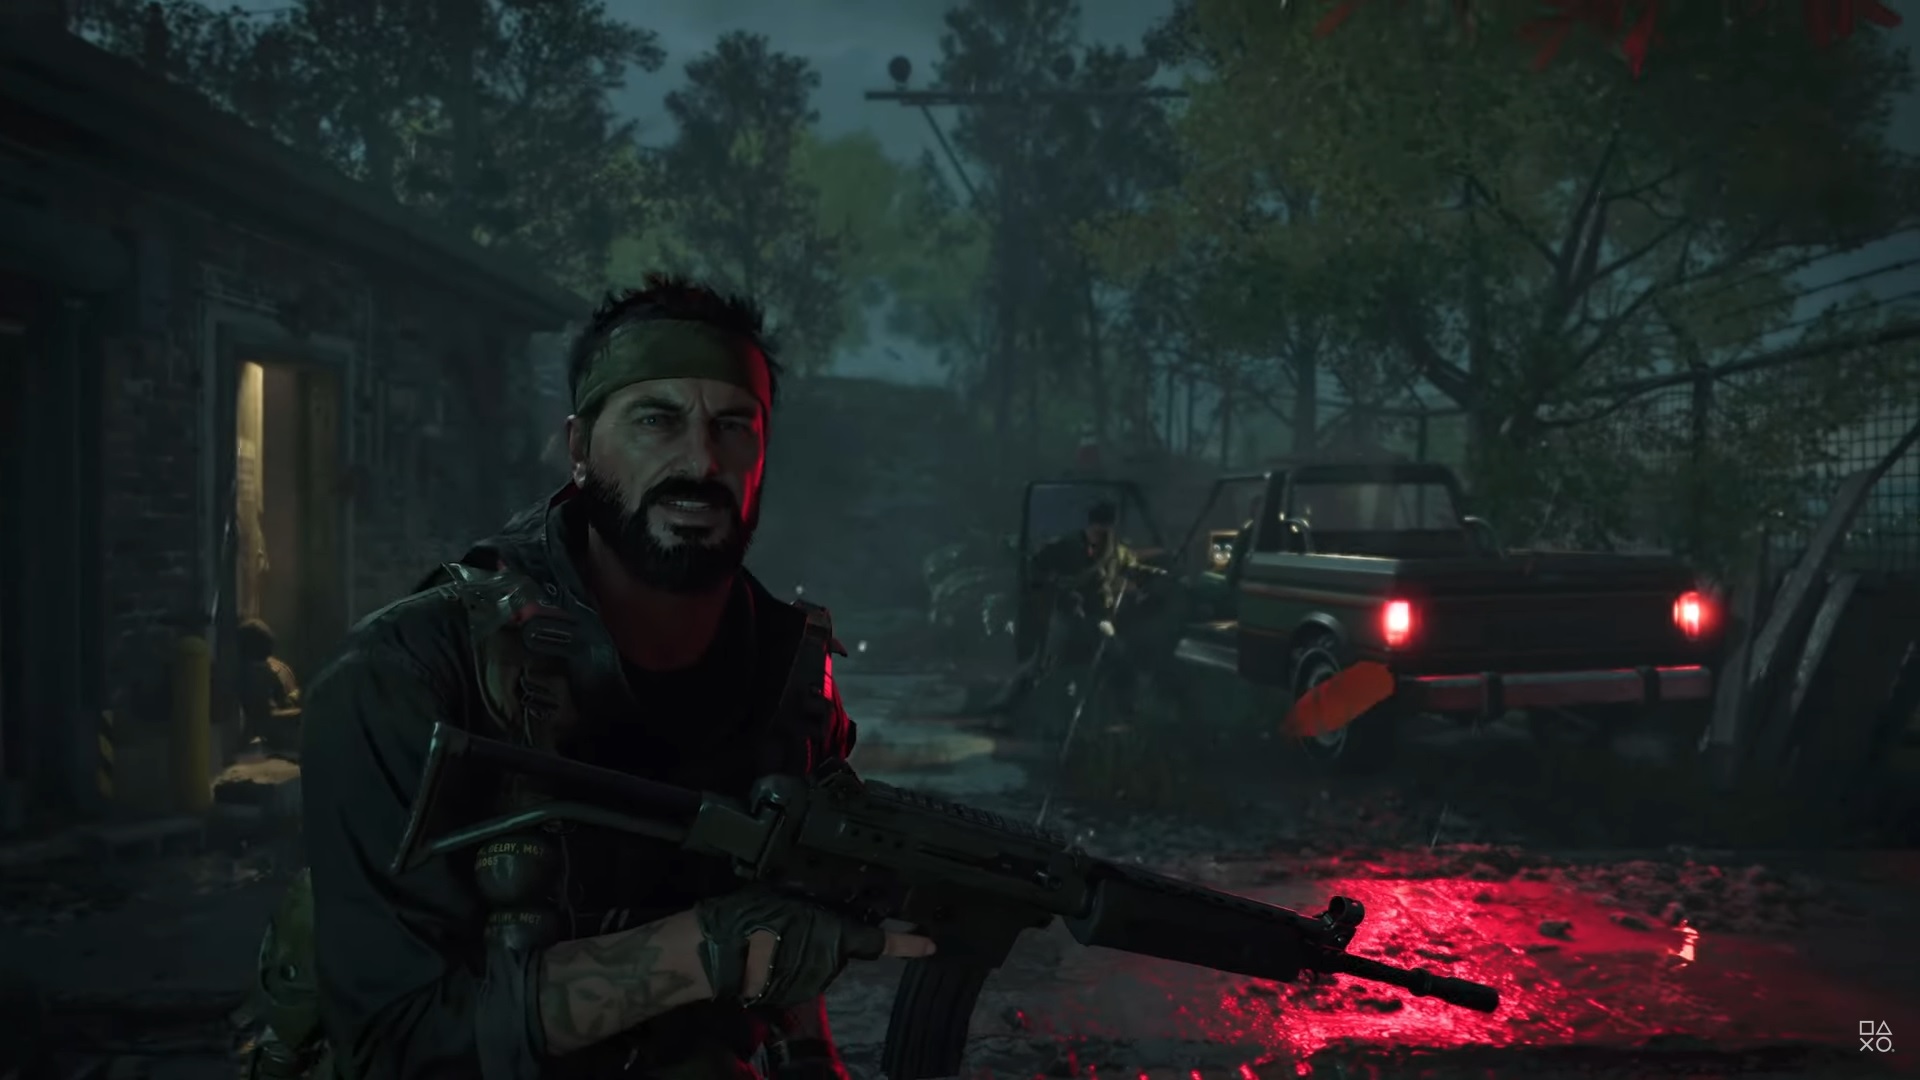 Call of Duty: Black Ops Cold War Nowhere Left to Run Teaser Trailer